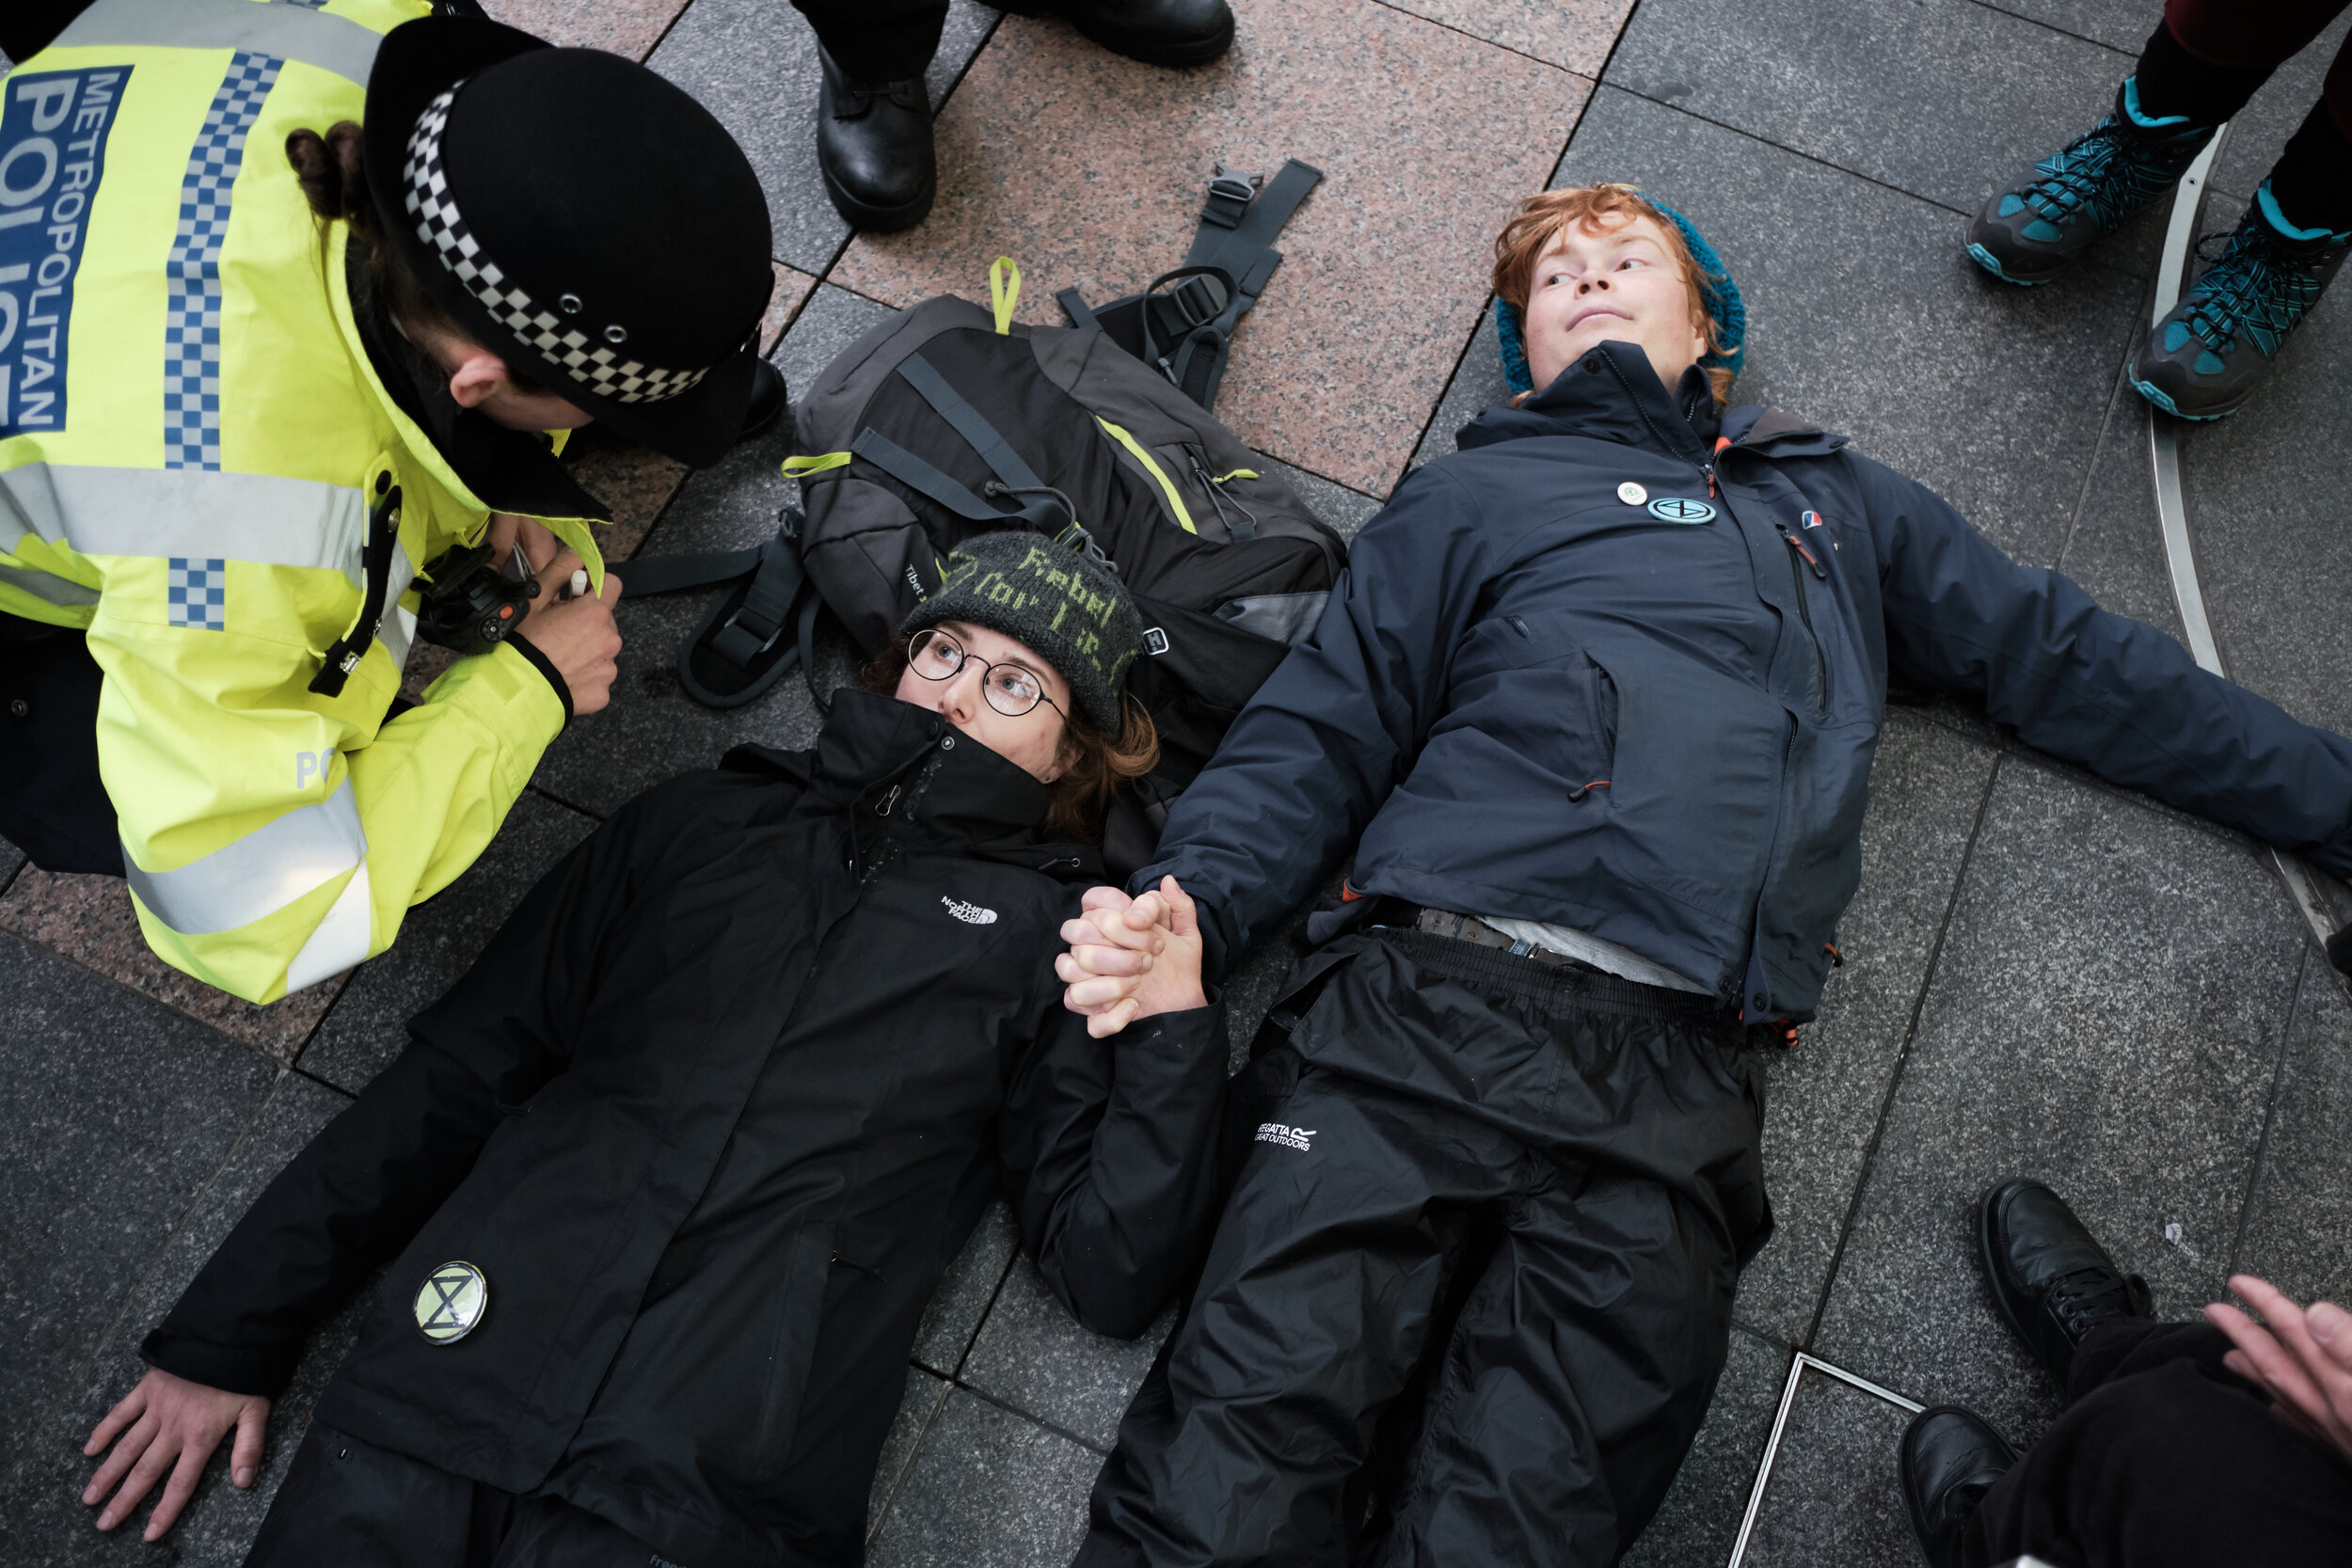  Activists glue themselves to the front entrance of Barclays Headquarters in Canary Wharf. Barclays is the sixth largest provider of financial services to the fossil fuel industry in the world and first in Europe. Unlike many others UK banks, Barclay